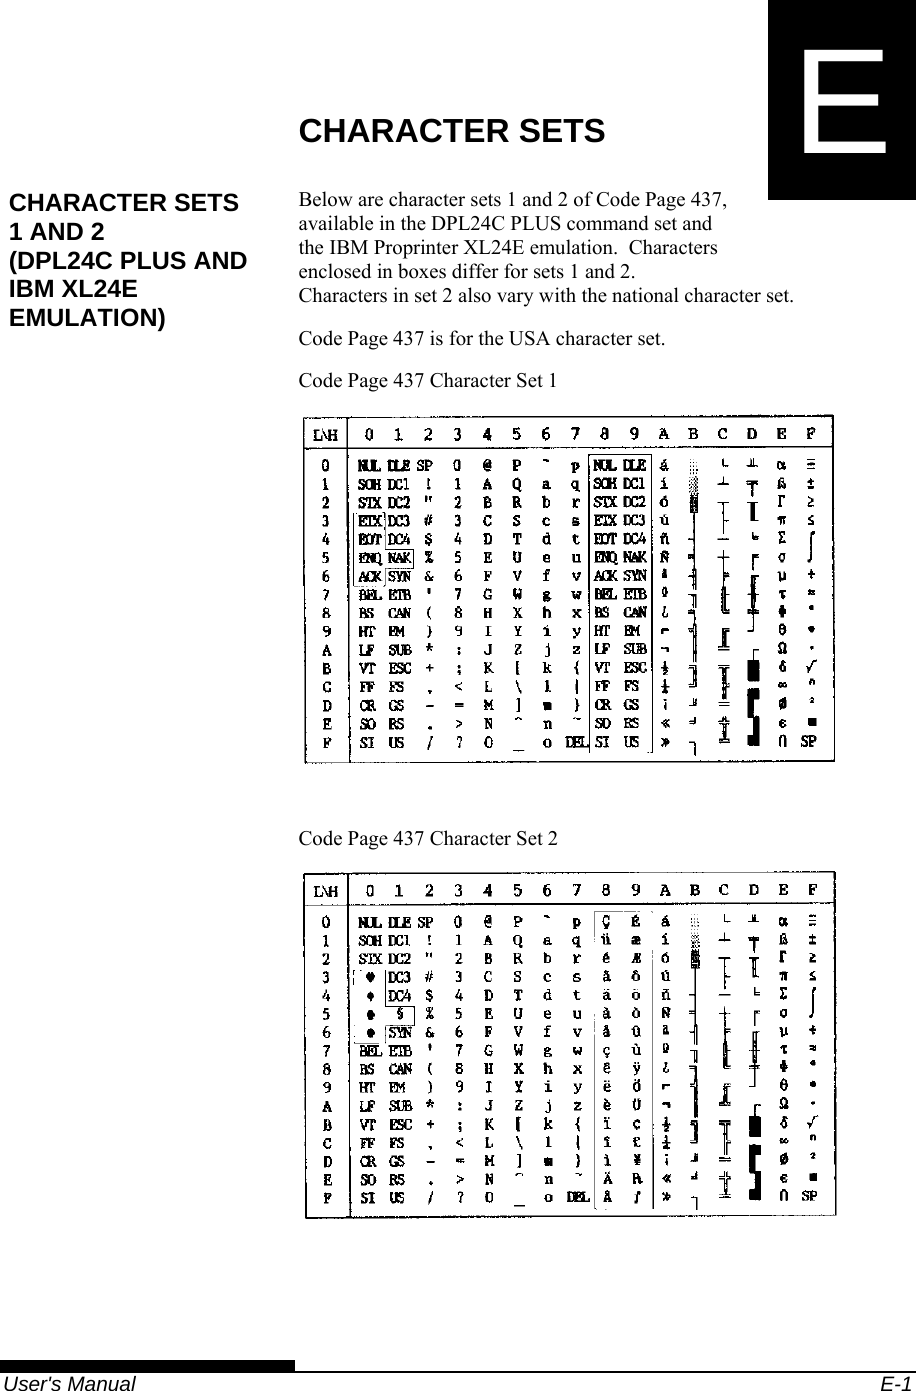   User&apos;s Manual  E-1 E  APPENDIX E  CHARACTER SETS CHARACTER SETS Below are character sets 1 and 2 of Code Page 437, available in the DPL24C PLUS command set and the IBM Proprinter XL24E emulation.  Characters enclosed in boxes differ for sets 1 and 2. Characters in set 2 also vary with the national character set. Code Page 437 is for the USA character set. Code Page 437 Character Set 1   Code Page 437 Character Set 2  CHARACTER SETS 1 AND 2 (DPL24C PLUS AND IBM XL24E EMULATION) 